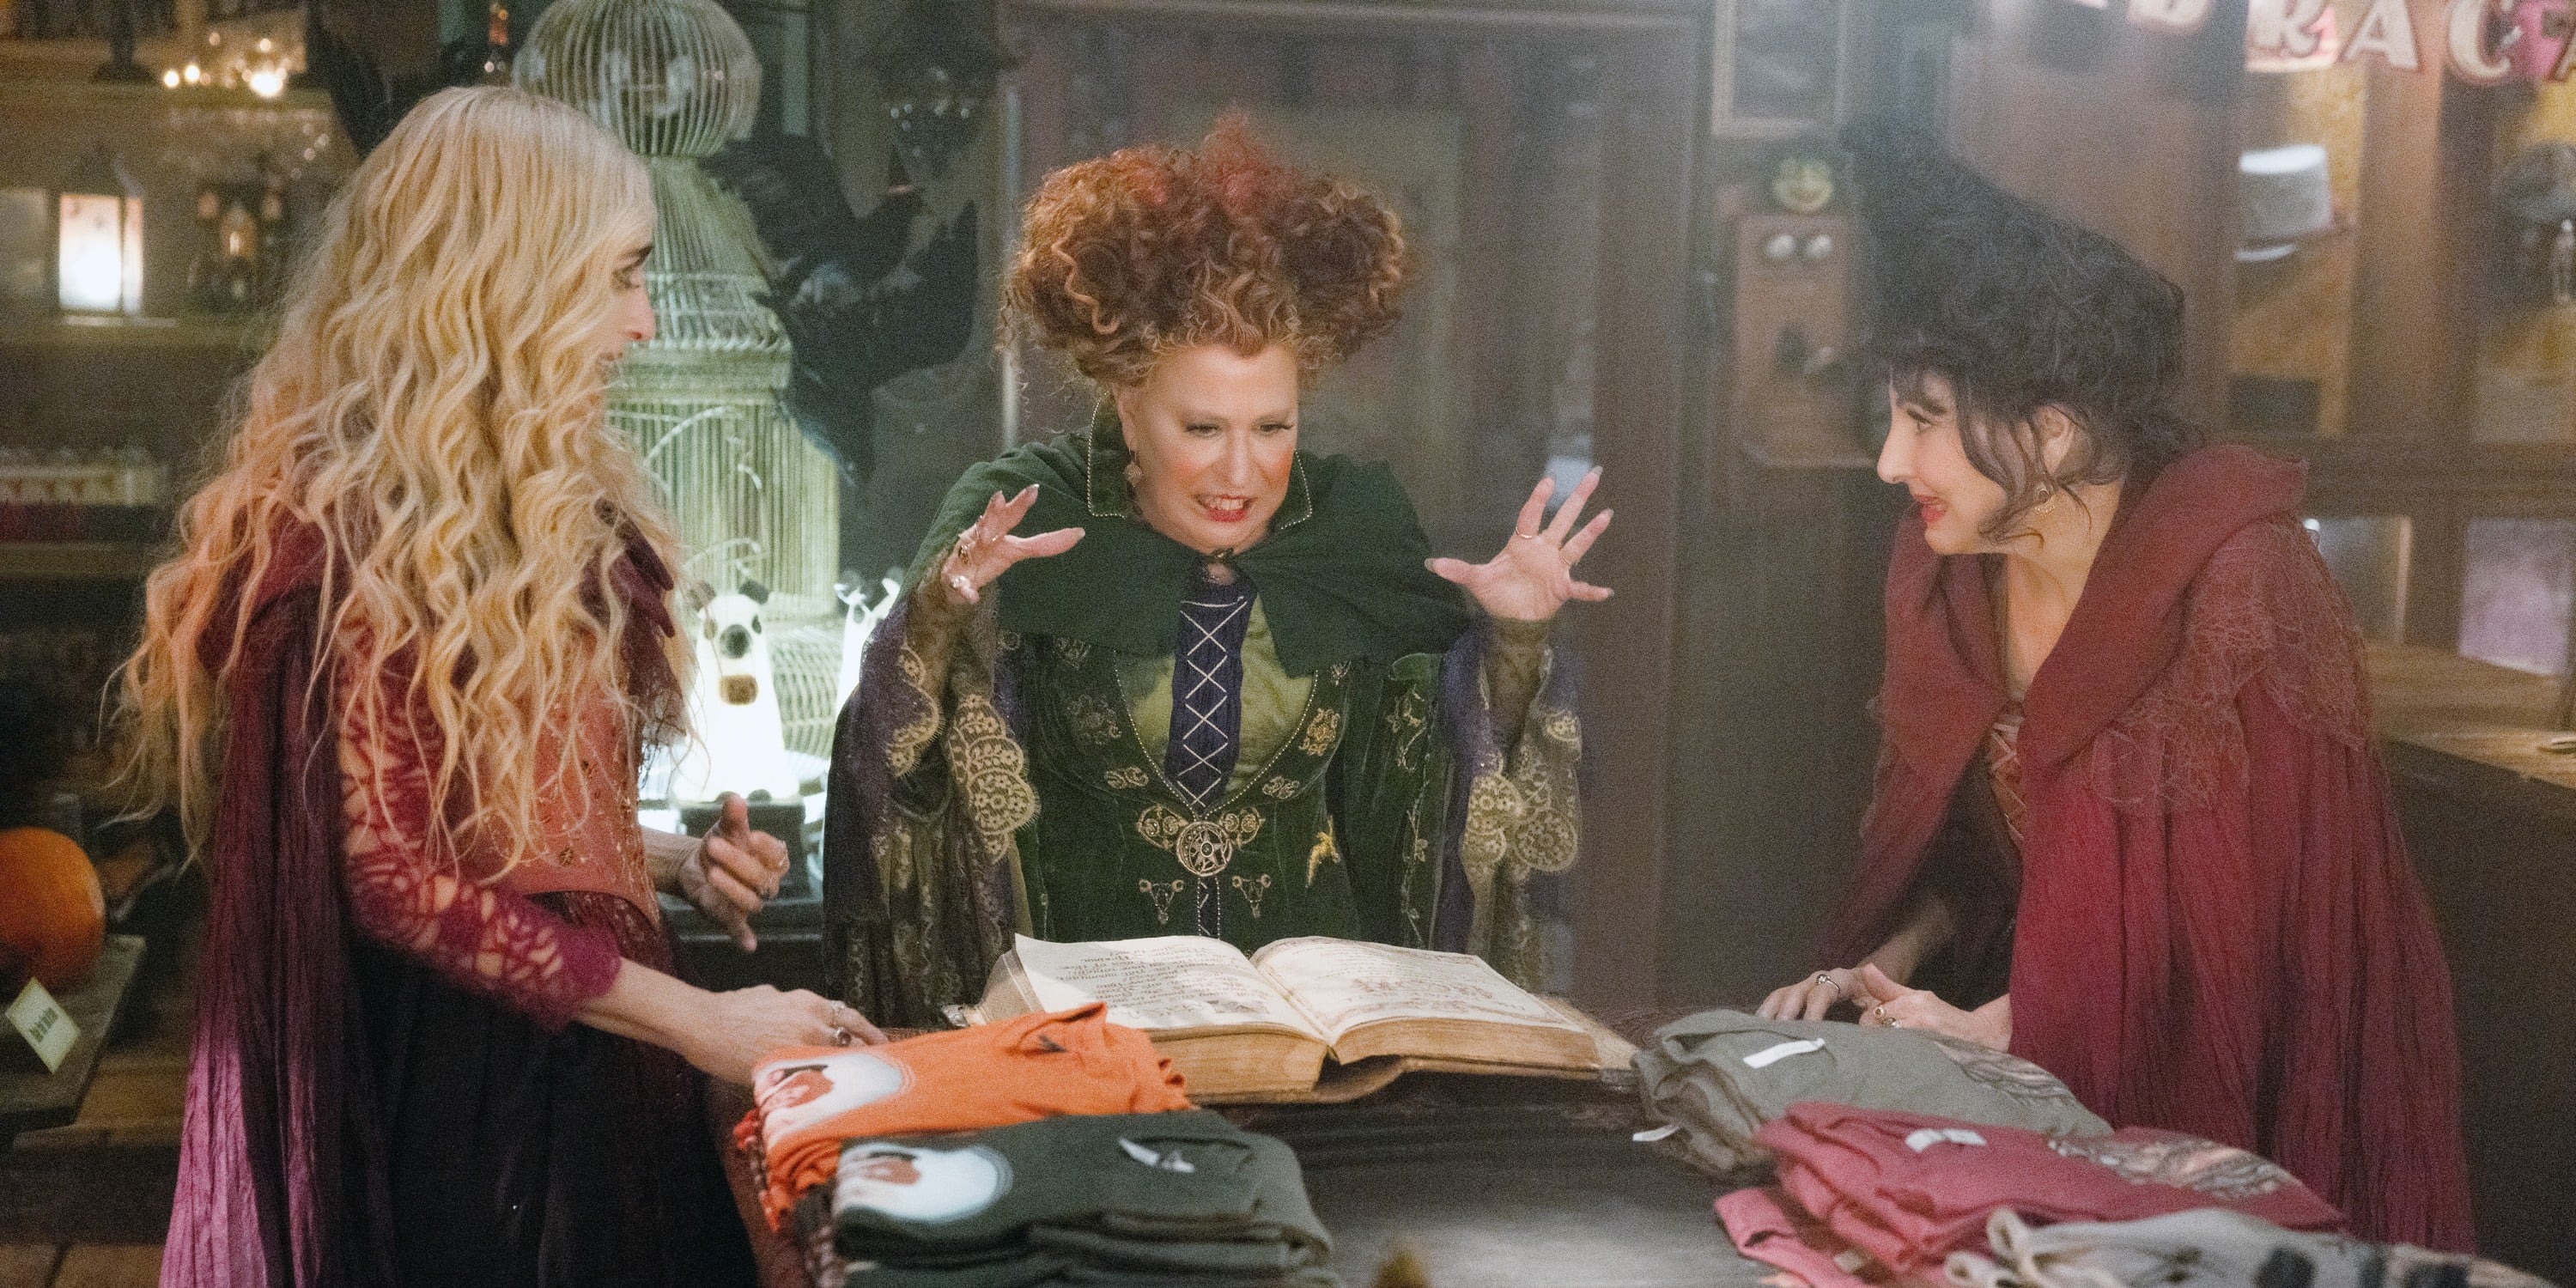 Hocus Pocus: Feminist Life Lessons From the Sanderson Sisters